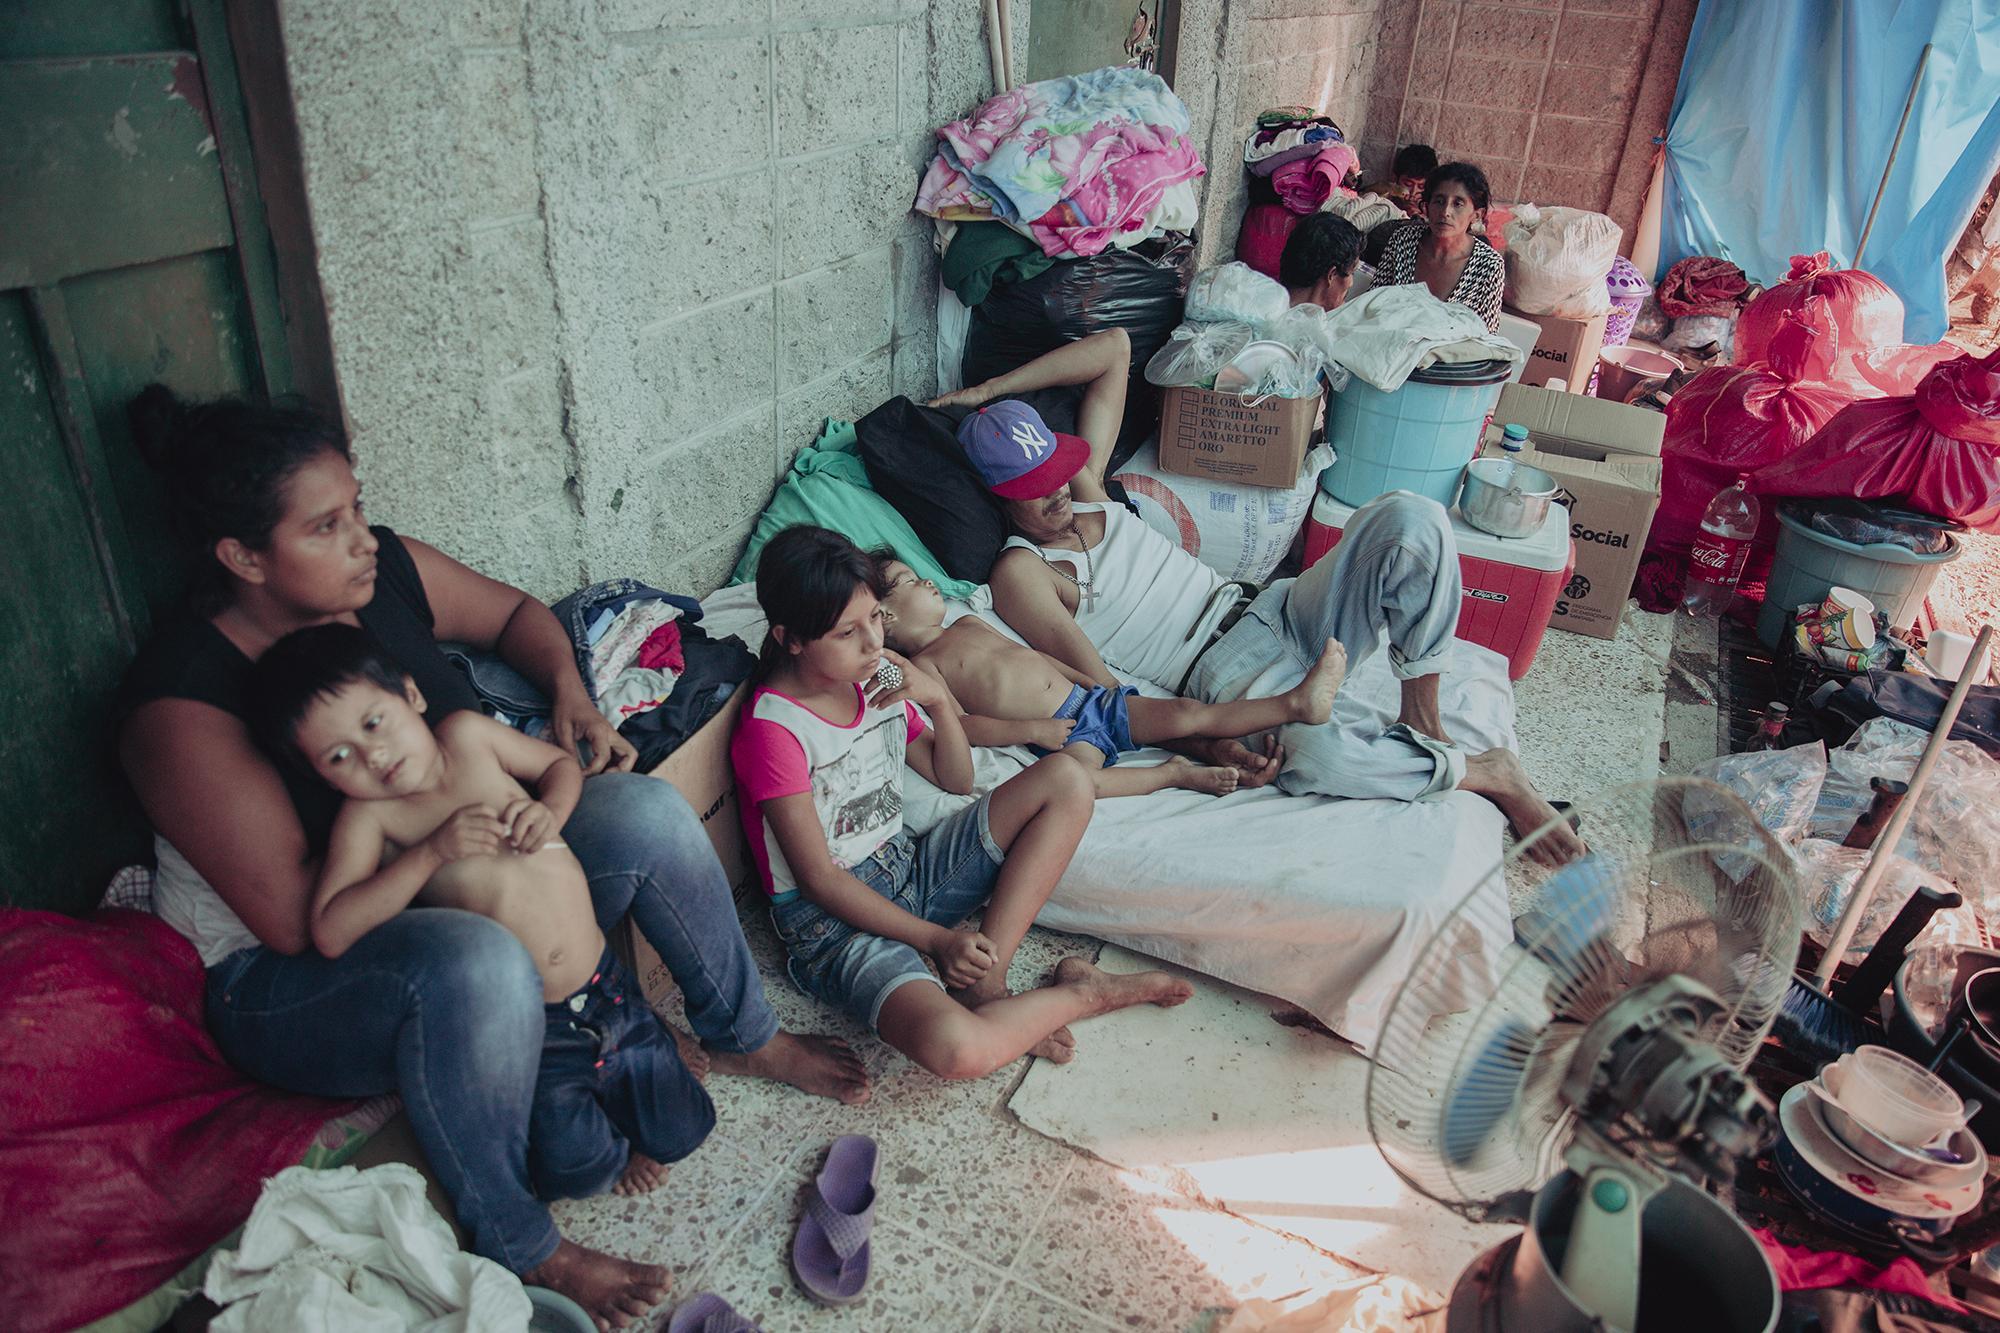 The Hernández family, which at the time of this picture had stayed at the shelter for 13 days, lived in the López Bonilla community in Baracoa until overflows from the Chamelecón during Eta caused thousands of families to abandon their homes. Most of those at the shelter had a cough. Some, though, were very sick and sapped of energy. No one had been tested for the virus. Photo: Carlos Barrera/El Faro